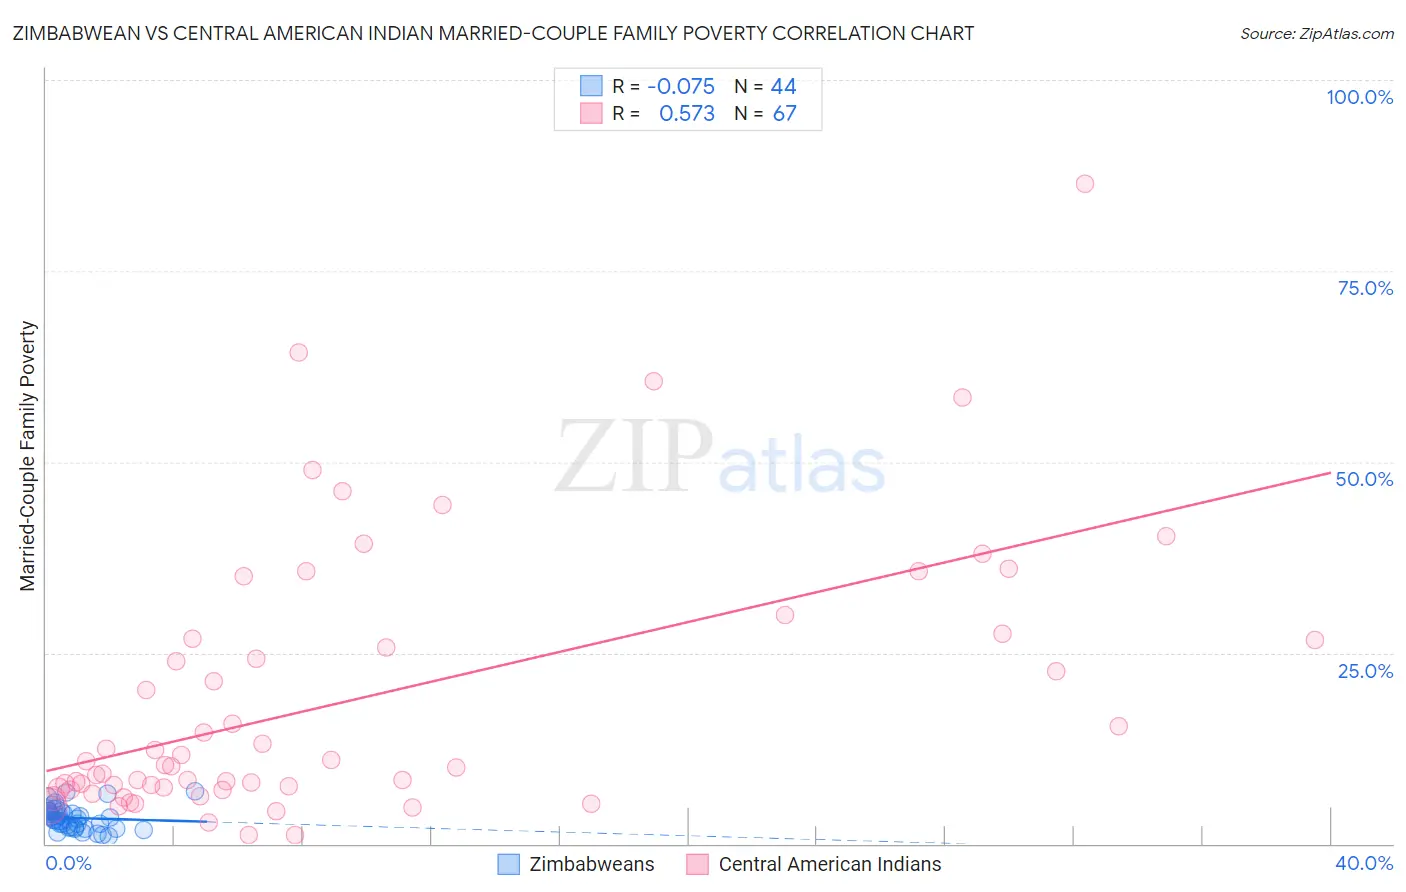 Zimbabwean vs Central American Indian Married-Couple Family Poverty